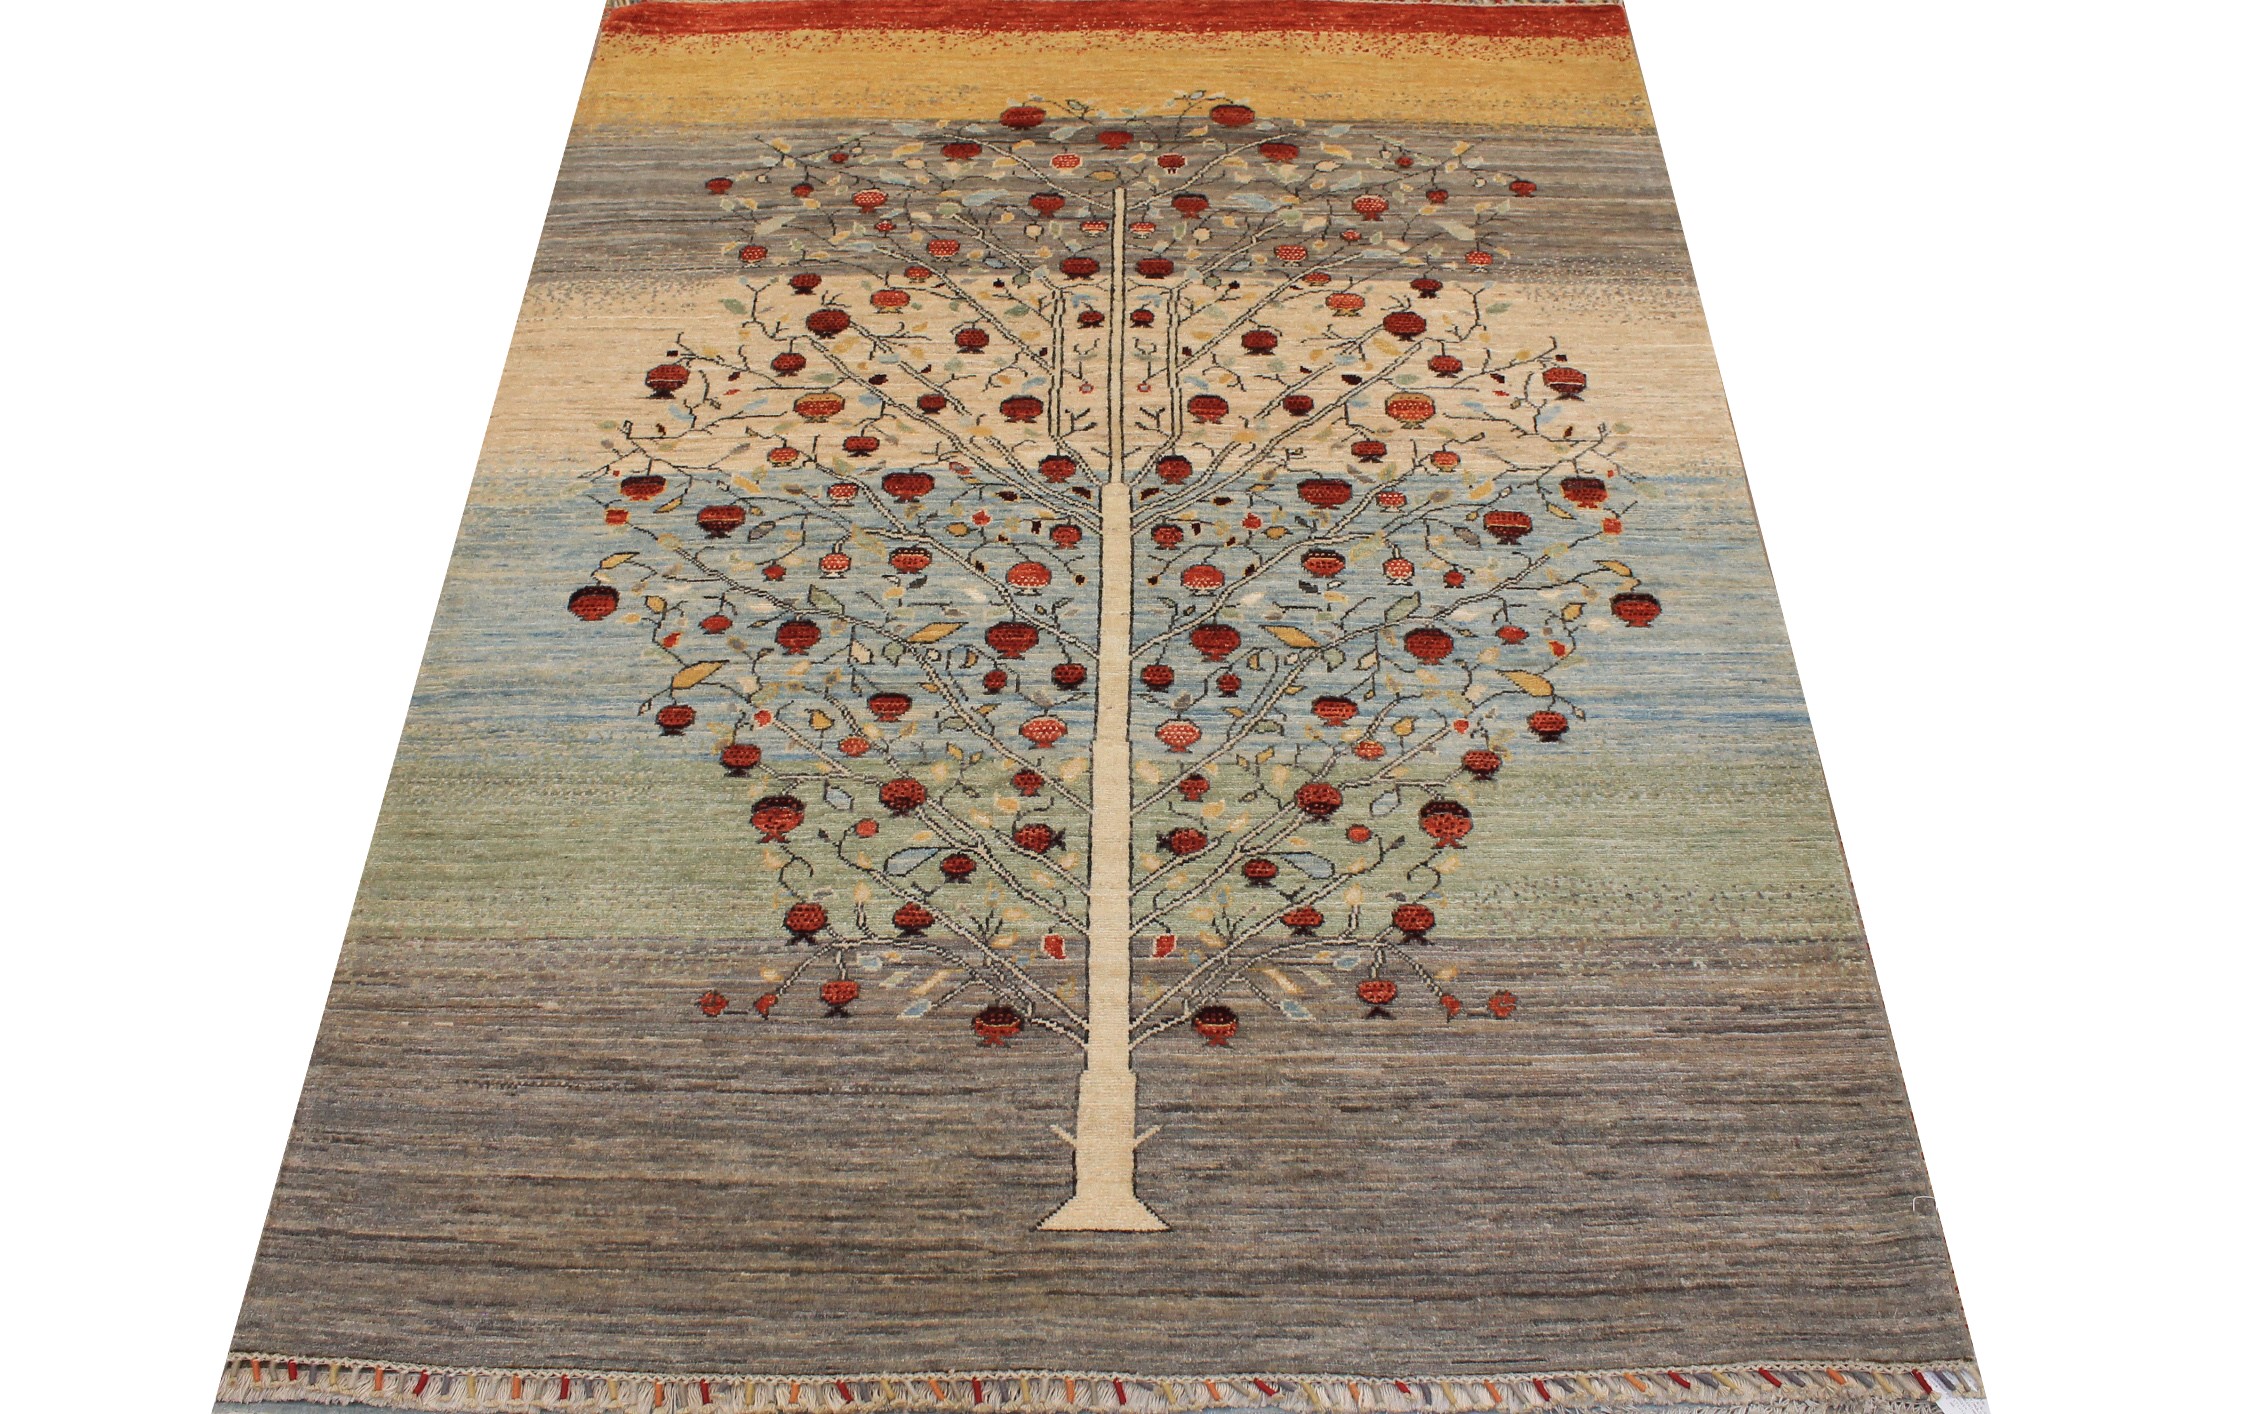 5x7/8 Aryana & Antique Revivals Hand Knotted  Area Rug - MR026641